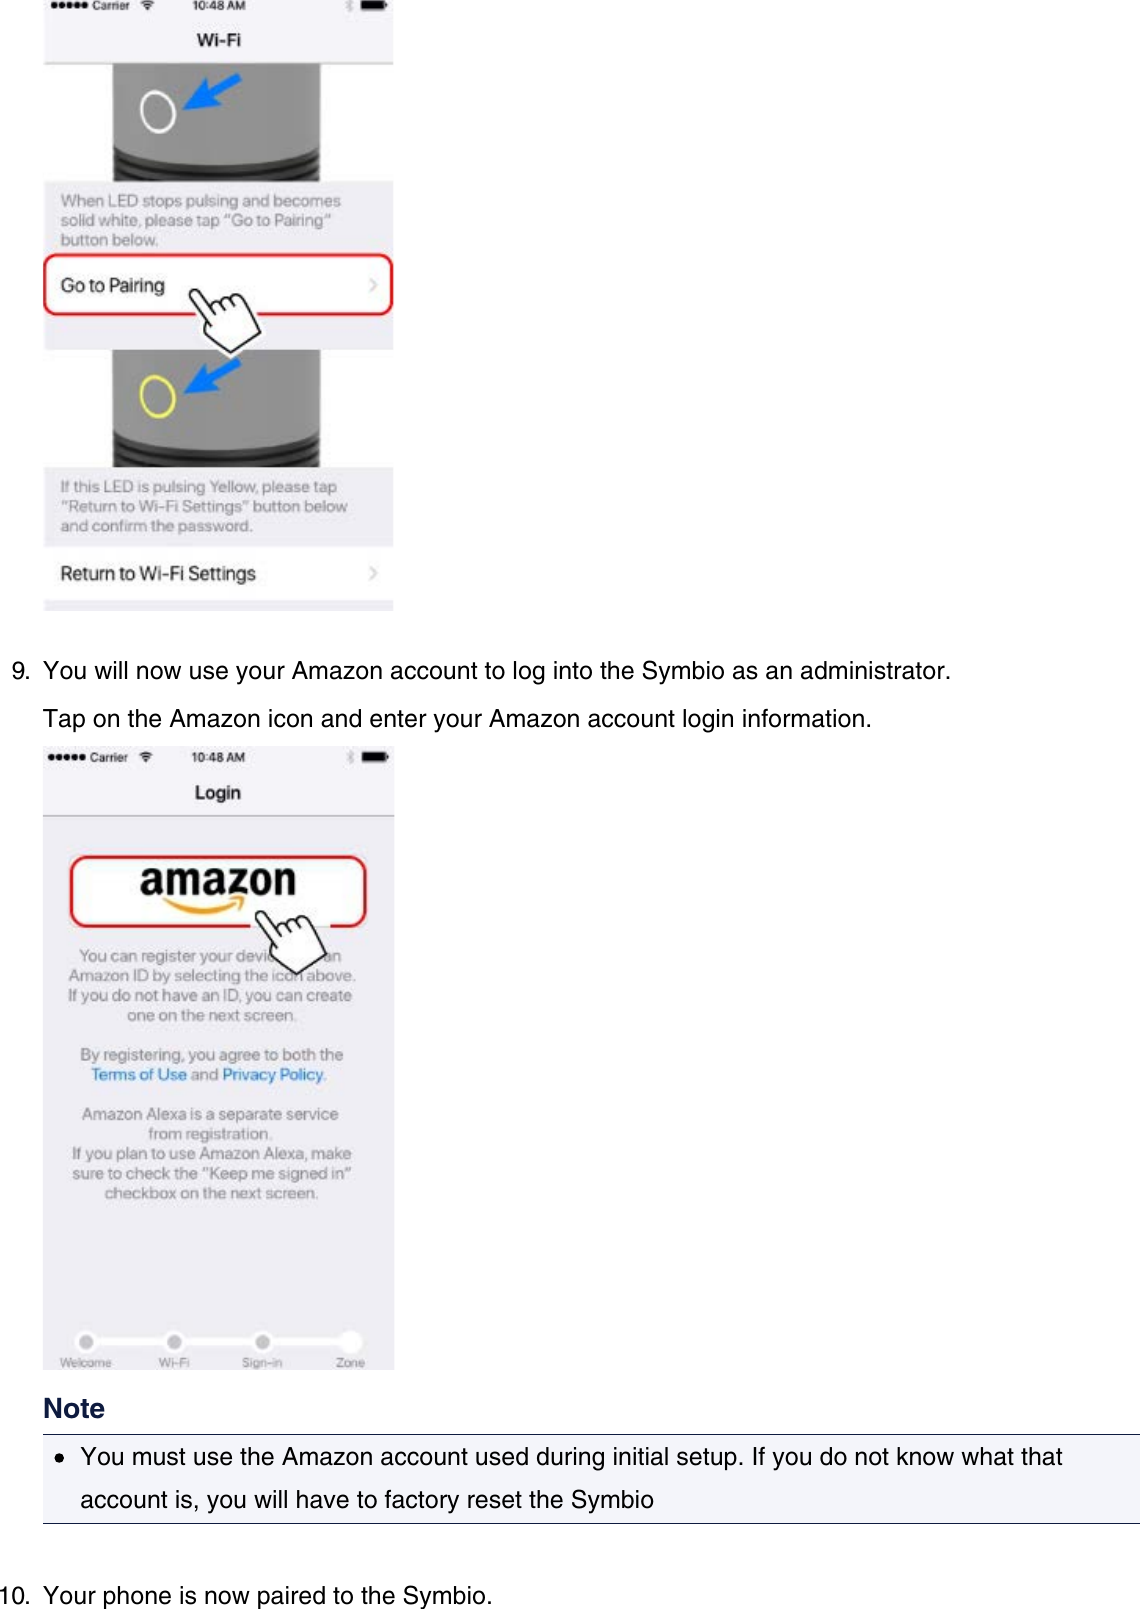 9.  You will now use your Amazon account to log into the Symbio as an administrator.Tap on the Amazon icon and enter your Amazon account login information.NoteYou must use the Amazon account used during initial setup. If you do not know what thataccount is, you will have to factory reset the Symbio10.  Your phone is now paired to the Symbio.